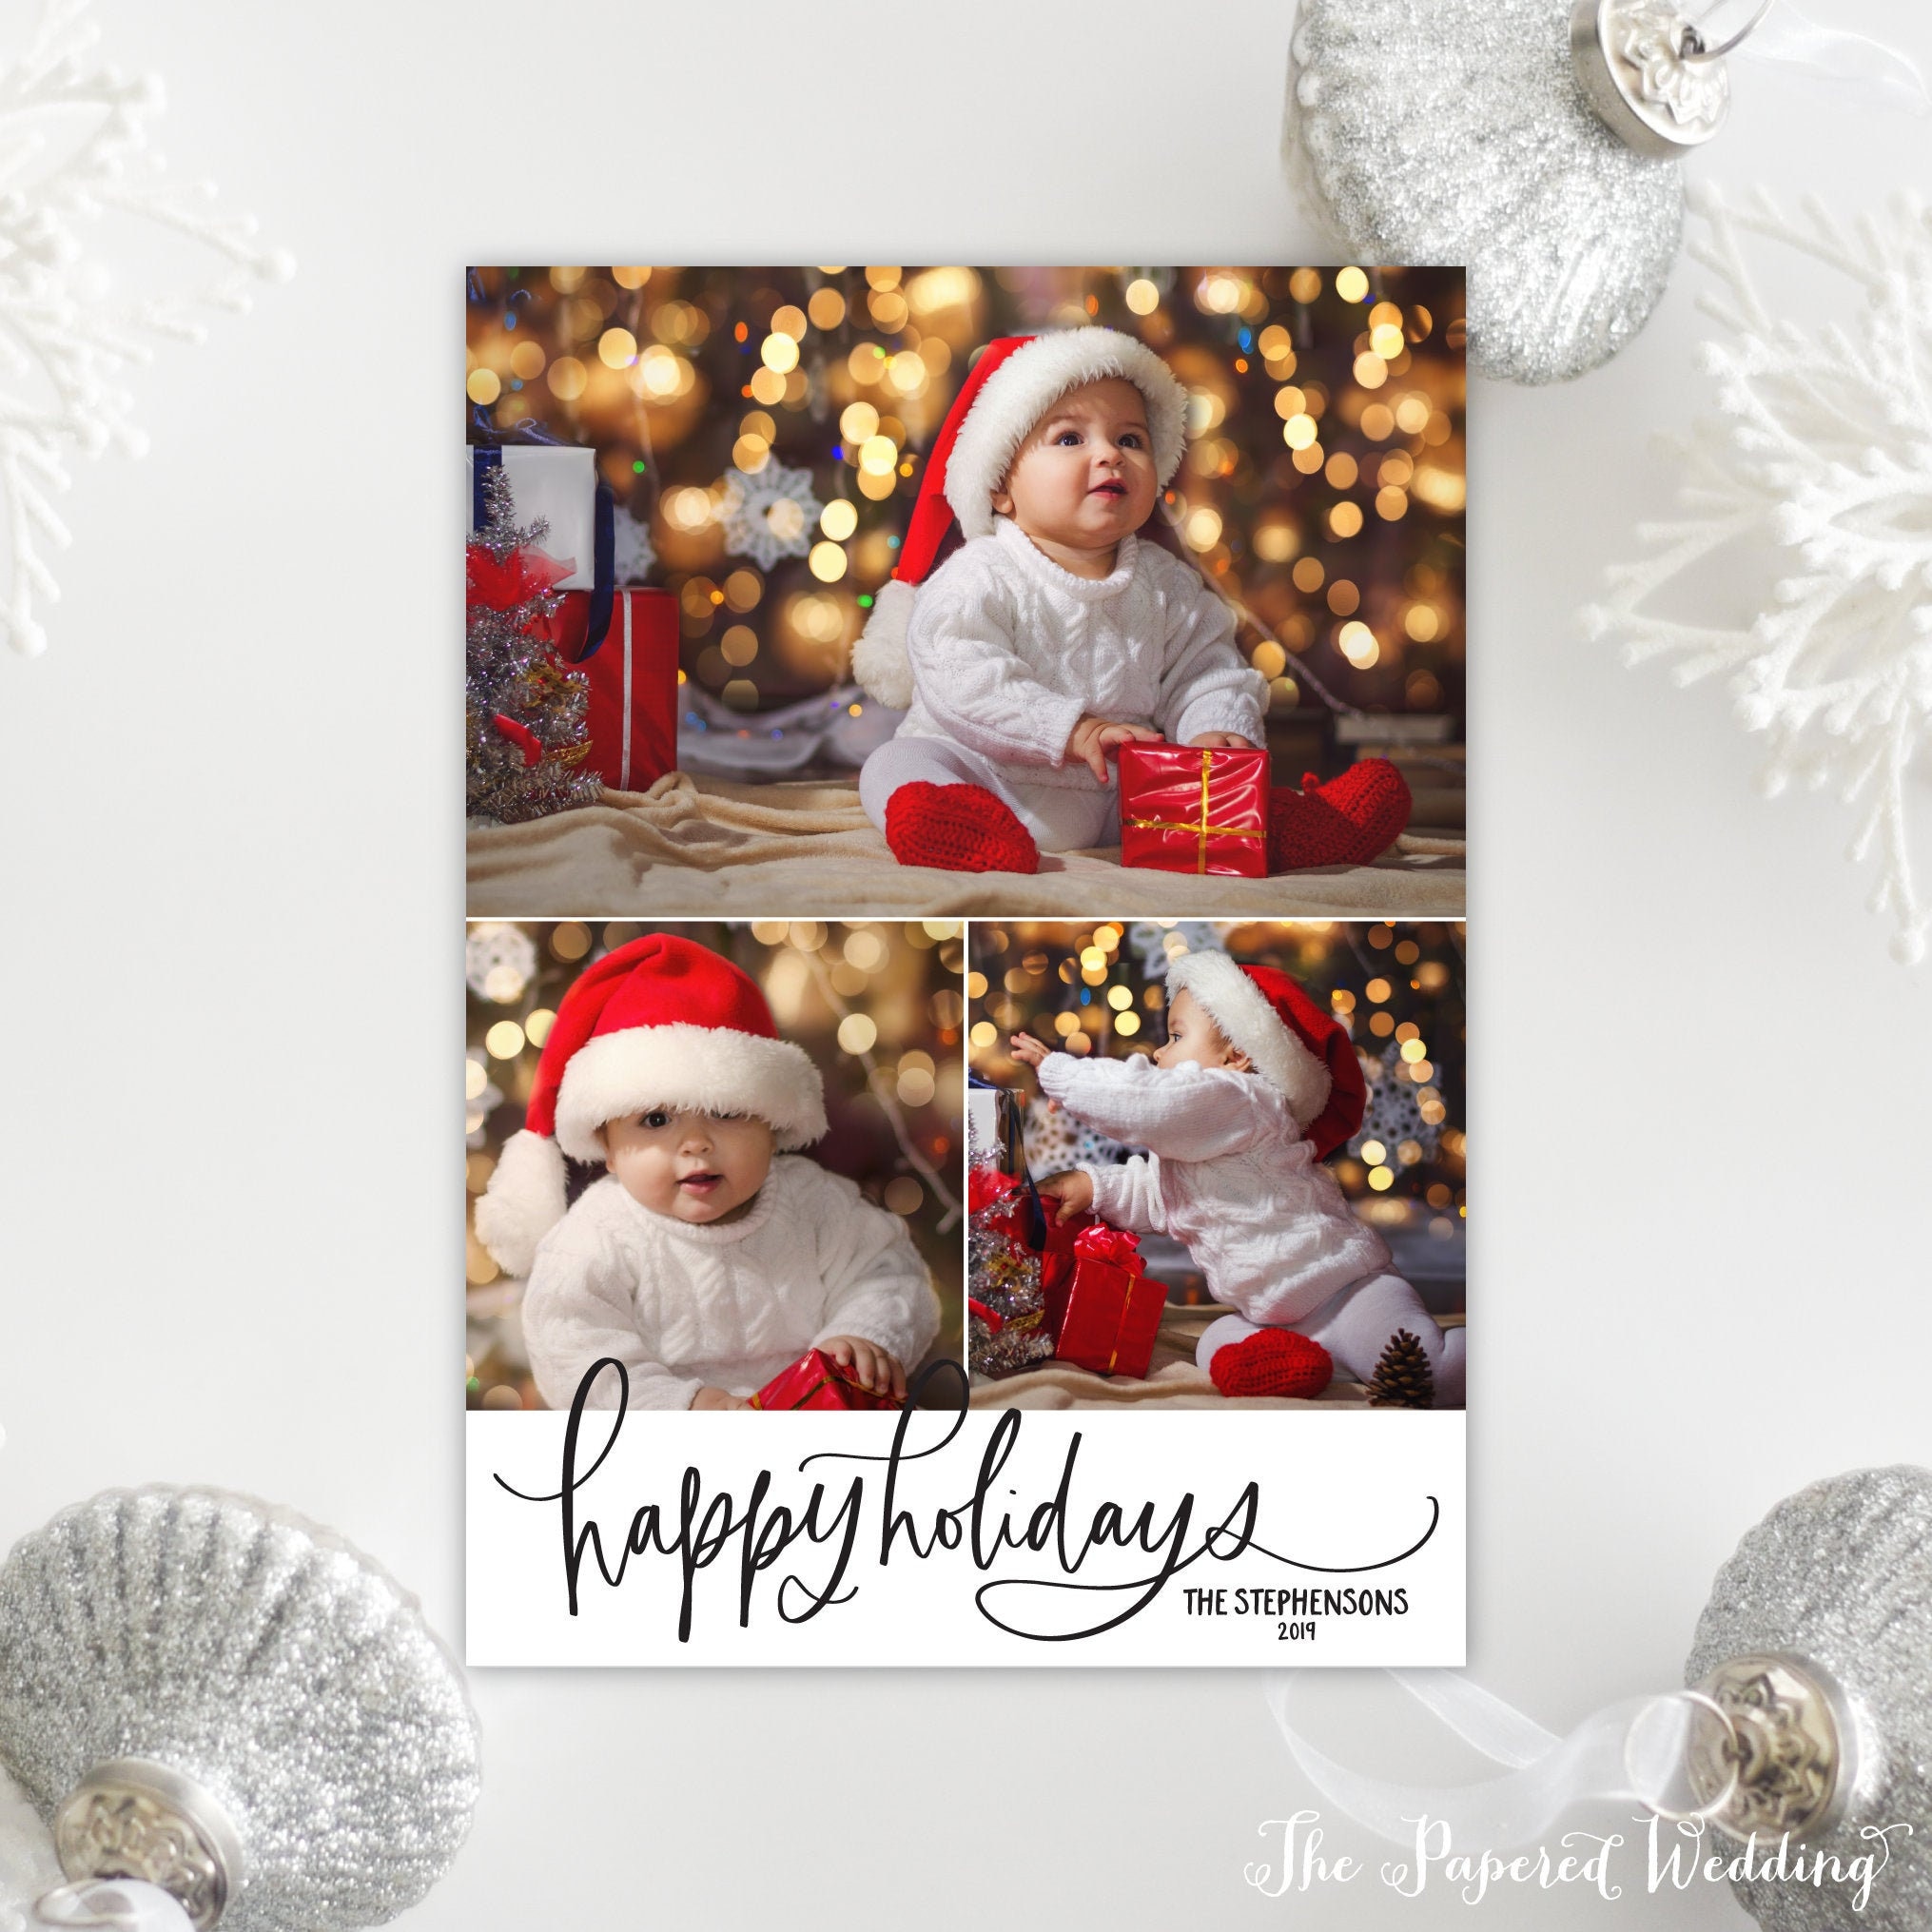 Printable Or Printed Happy Holidays Photo Cards - Three Pictures Christmas with Modern Holidays, Non-Religious Holiday 070 P3"